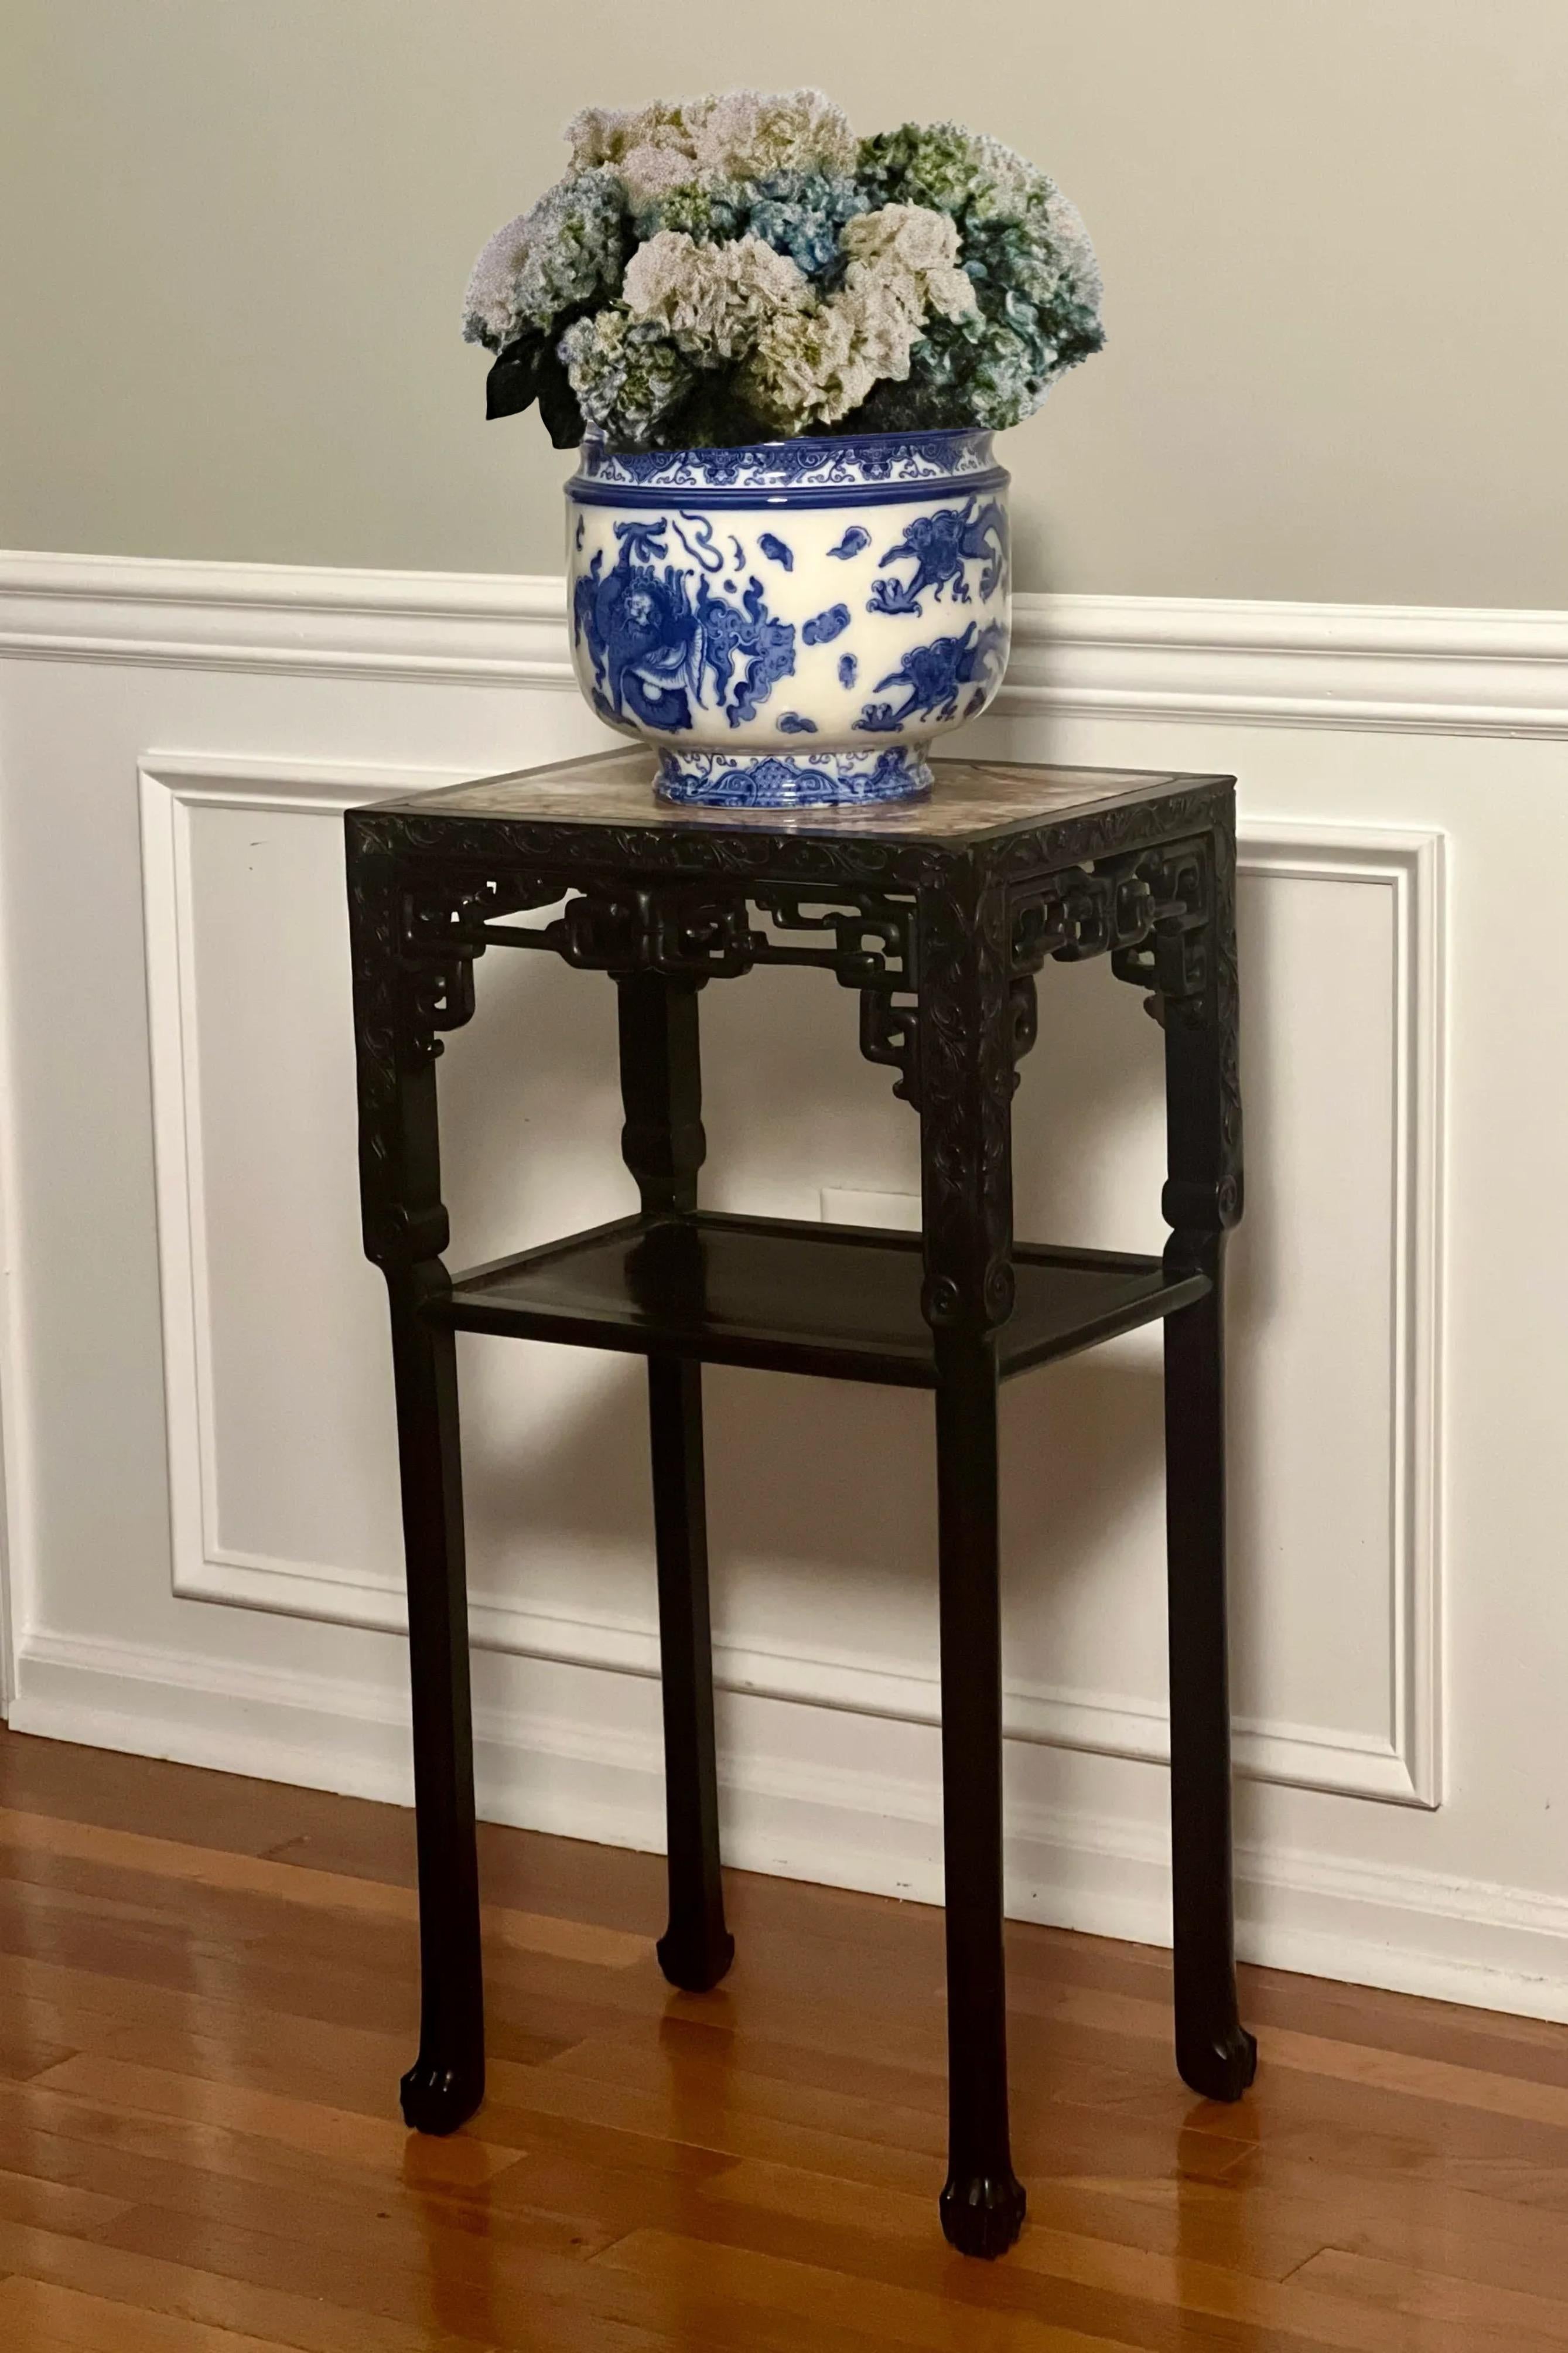 Royal Doulton 'Oyama' Pattern Flow Blue Porcelain Jardiniere In Good Condition For Sale In Doylestown, PA